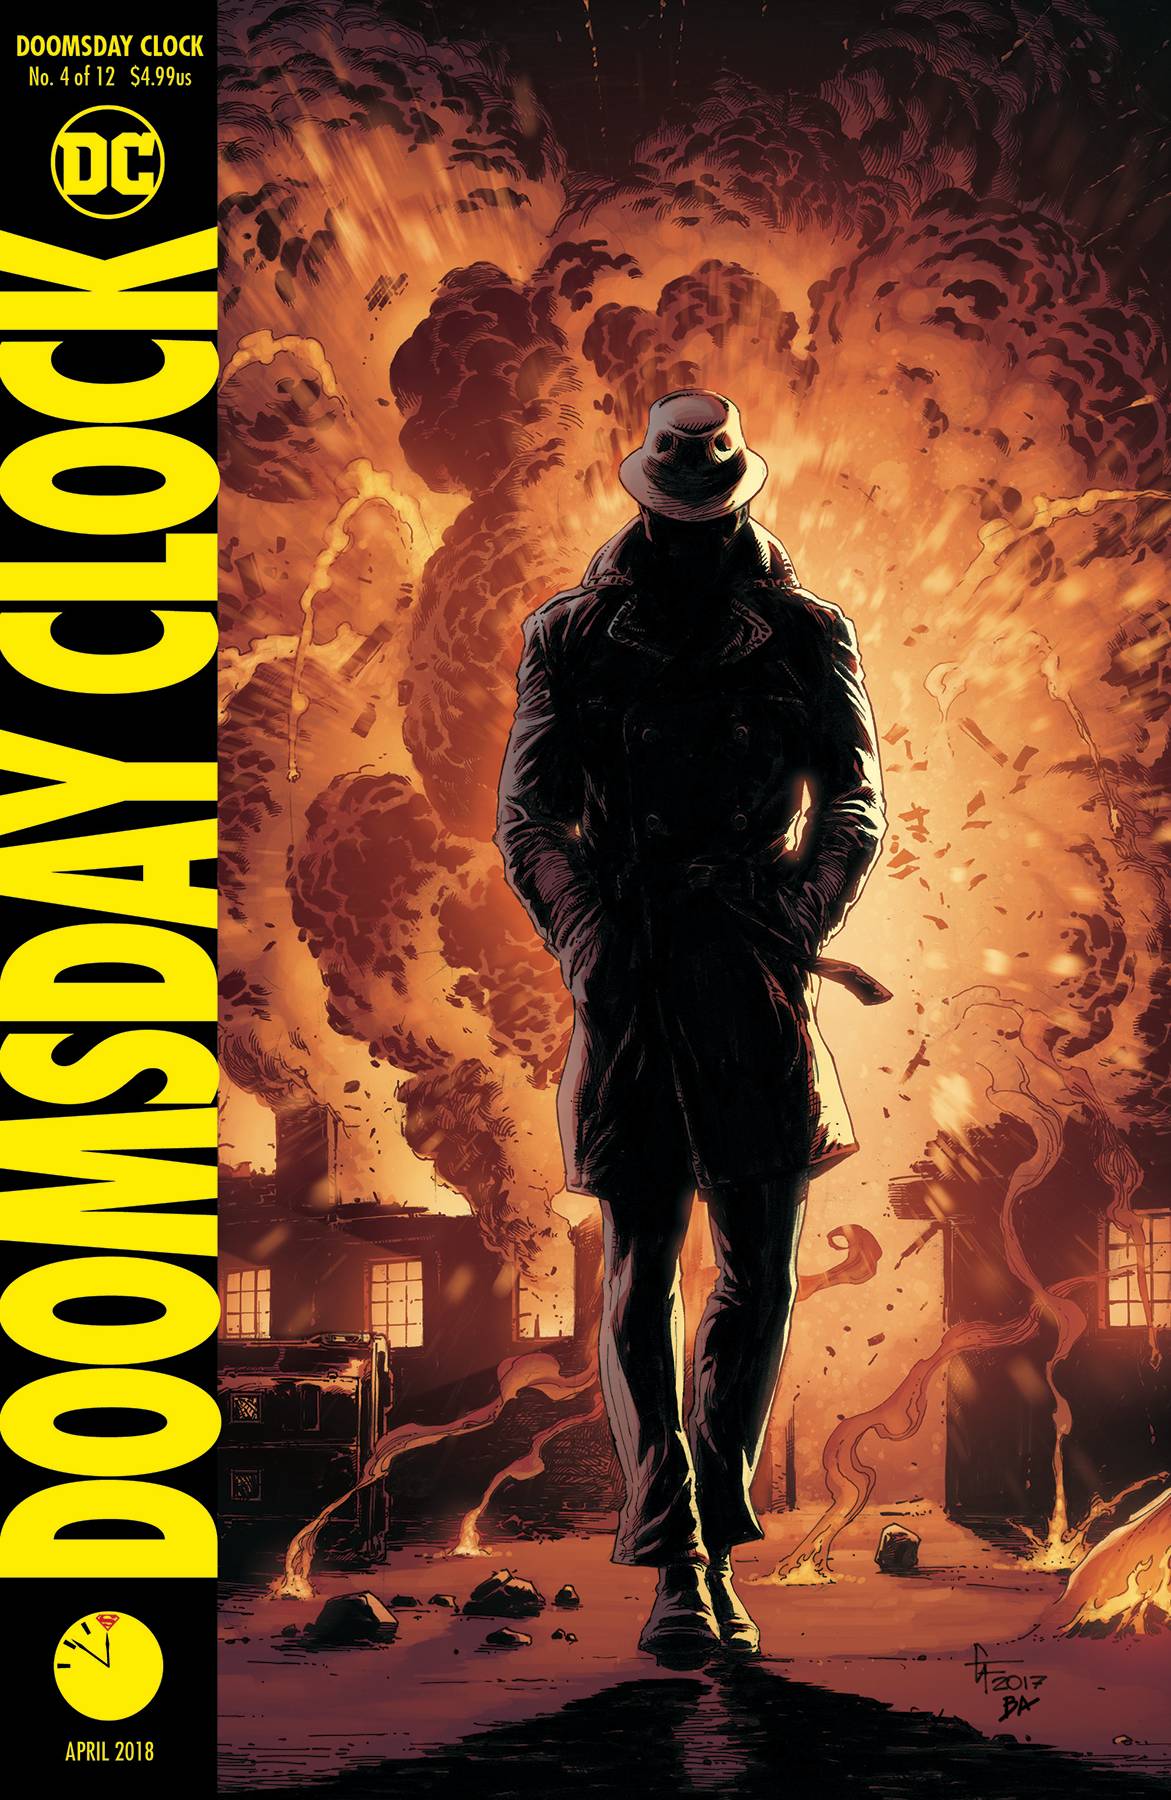 Doomsday Clock #4 Variant Edition (Of 12)